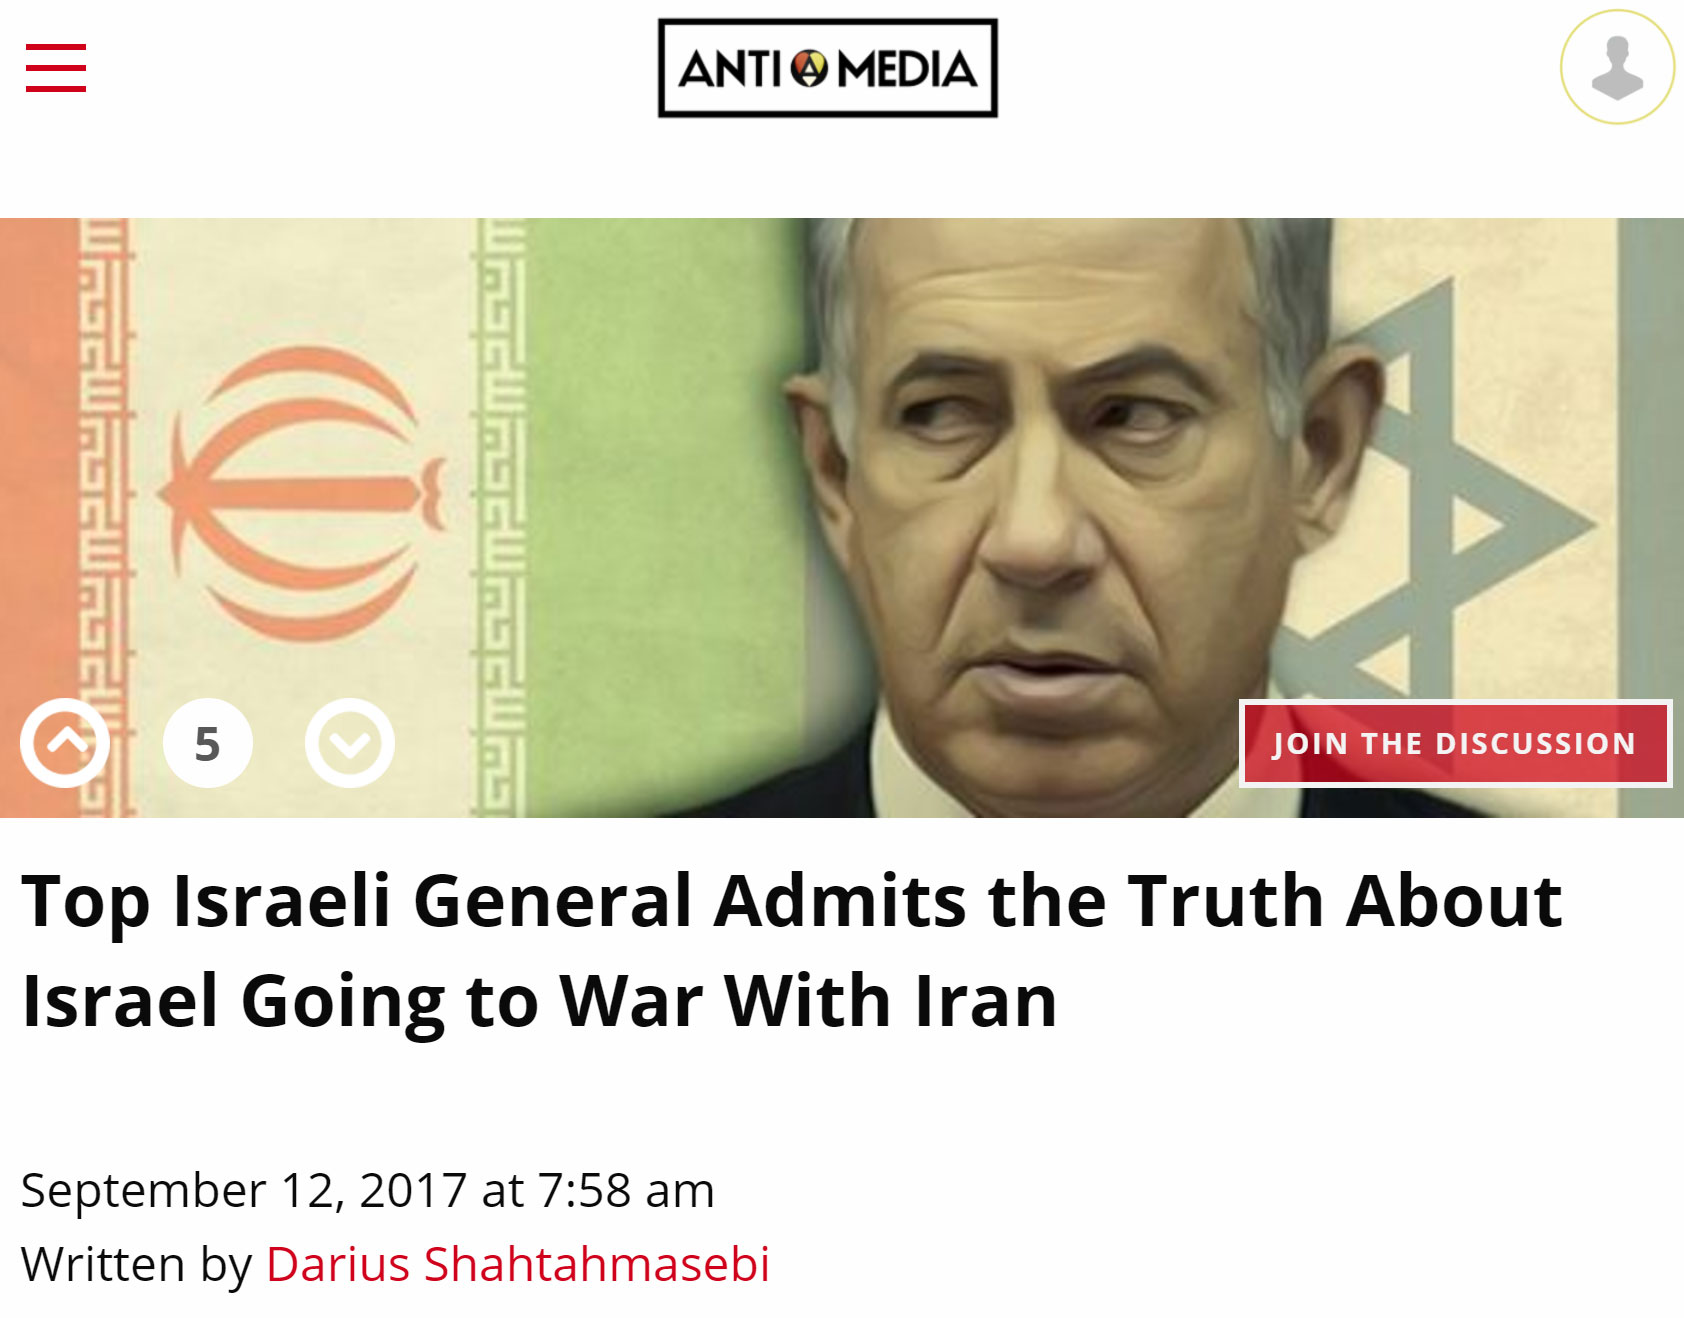 21-Top-Israeli-General-Admits-the-Truth-About-Israel-Going-to-War-With-Iran.jpg